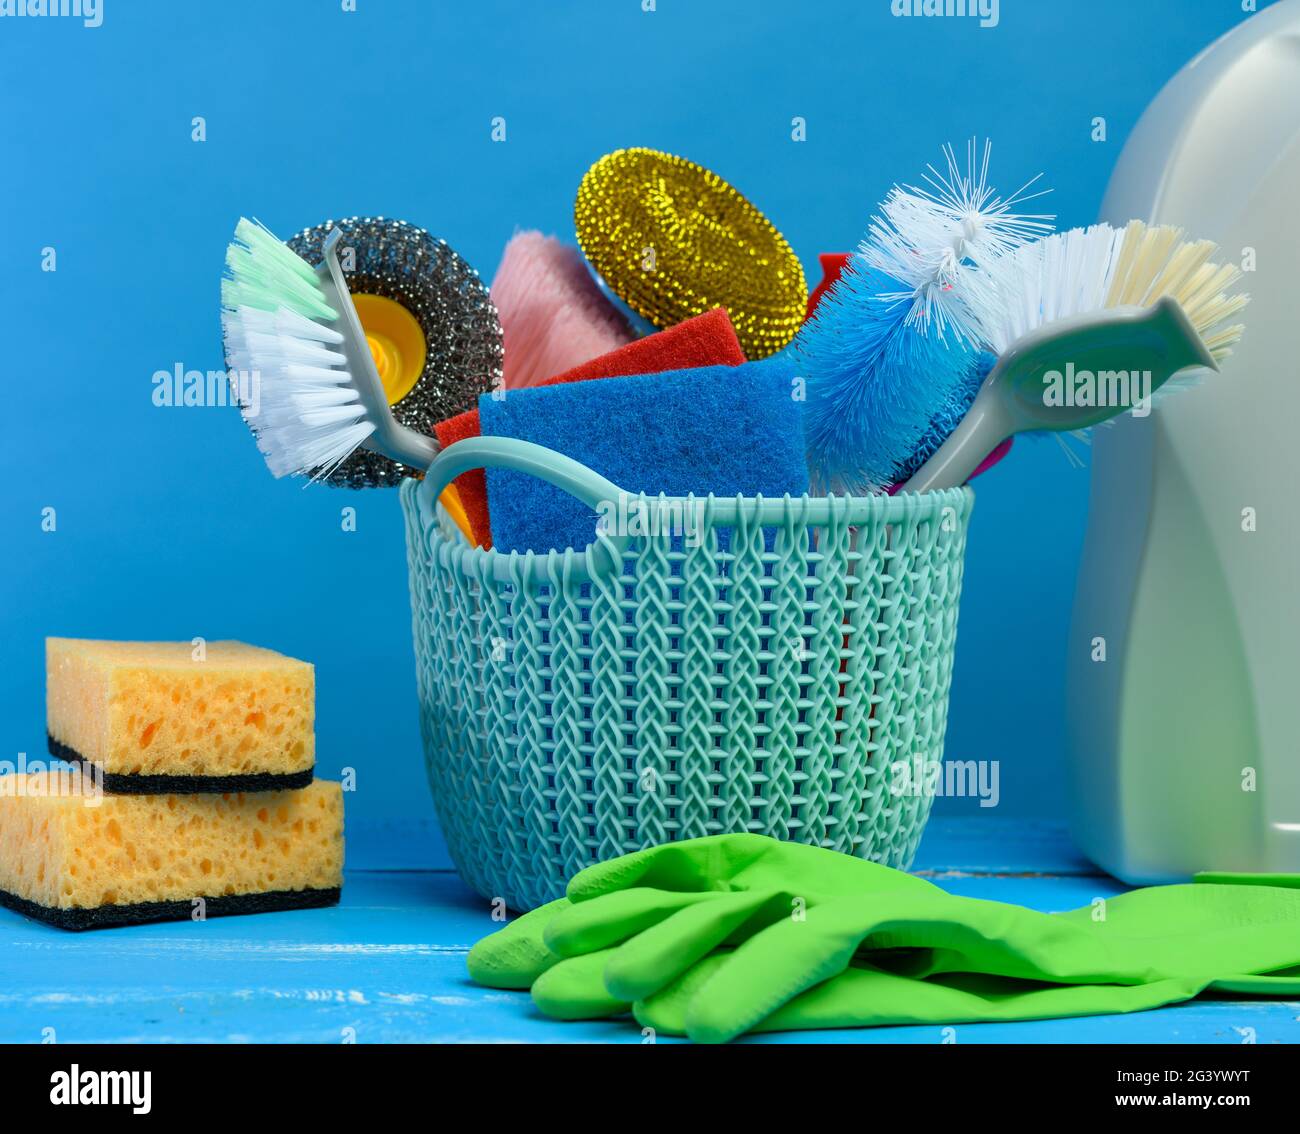 https://c8.alamy.com/comp/2G3YWYT/blue-plastic-basket-with-brushes-sponges-and-rubber-gloves-for-cleaning-2G3YWYT.jpg